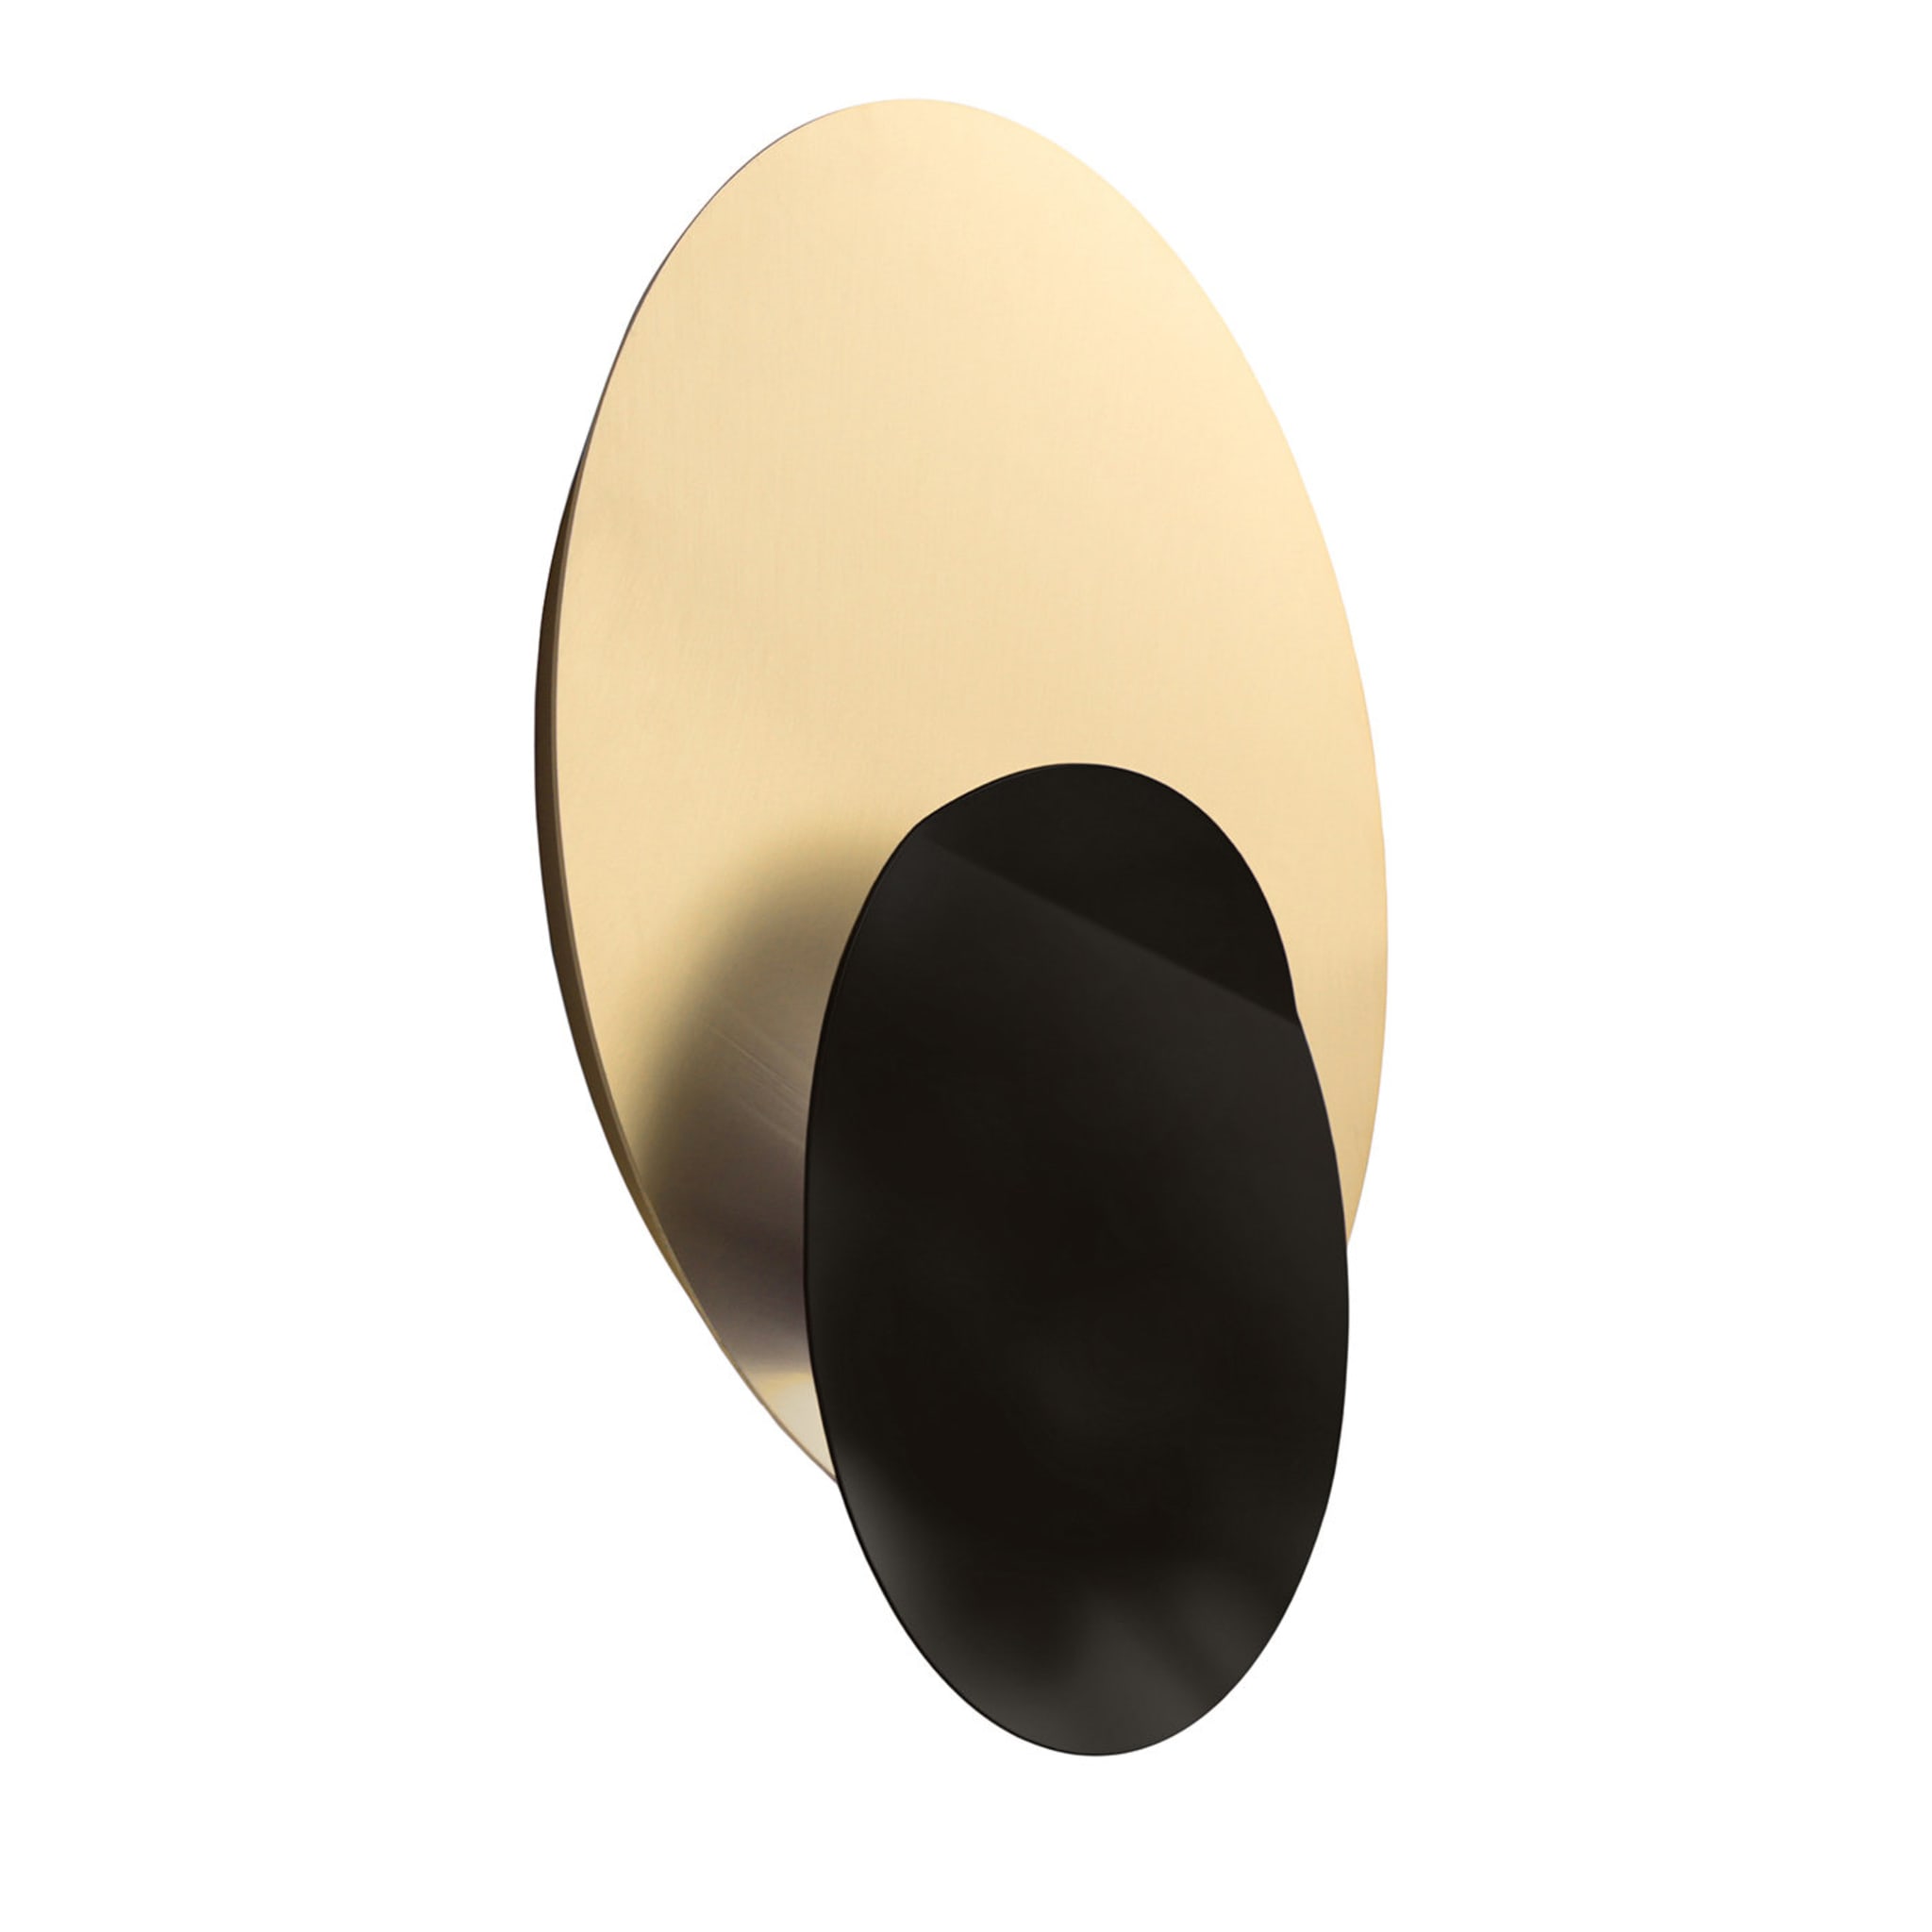 Scur & Ciar Sconce by Isacco Brioschi - Main view